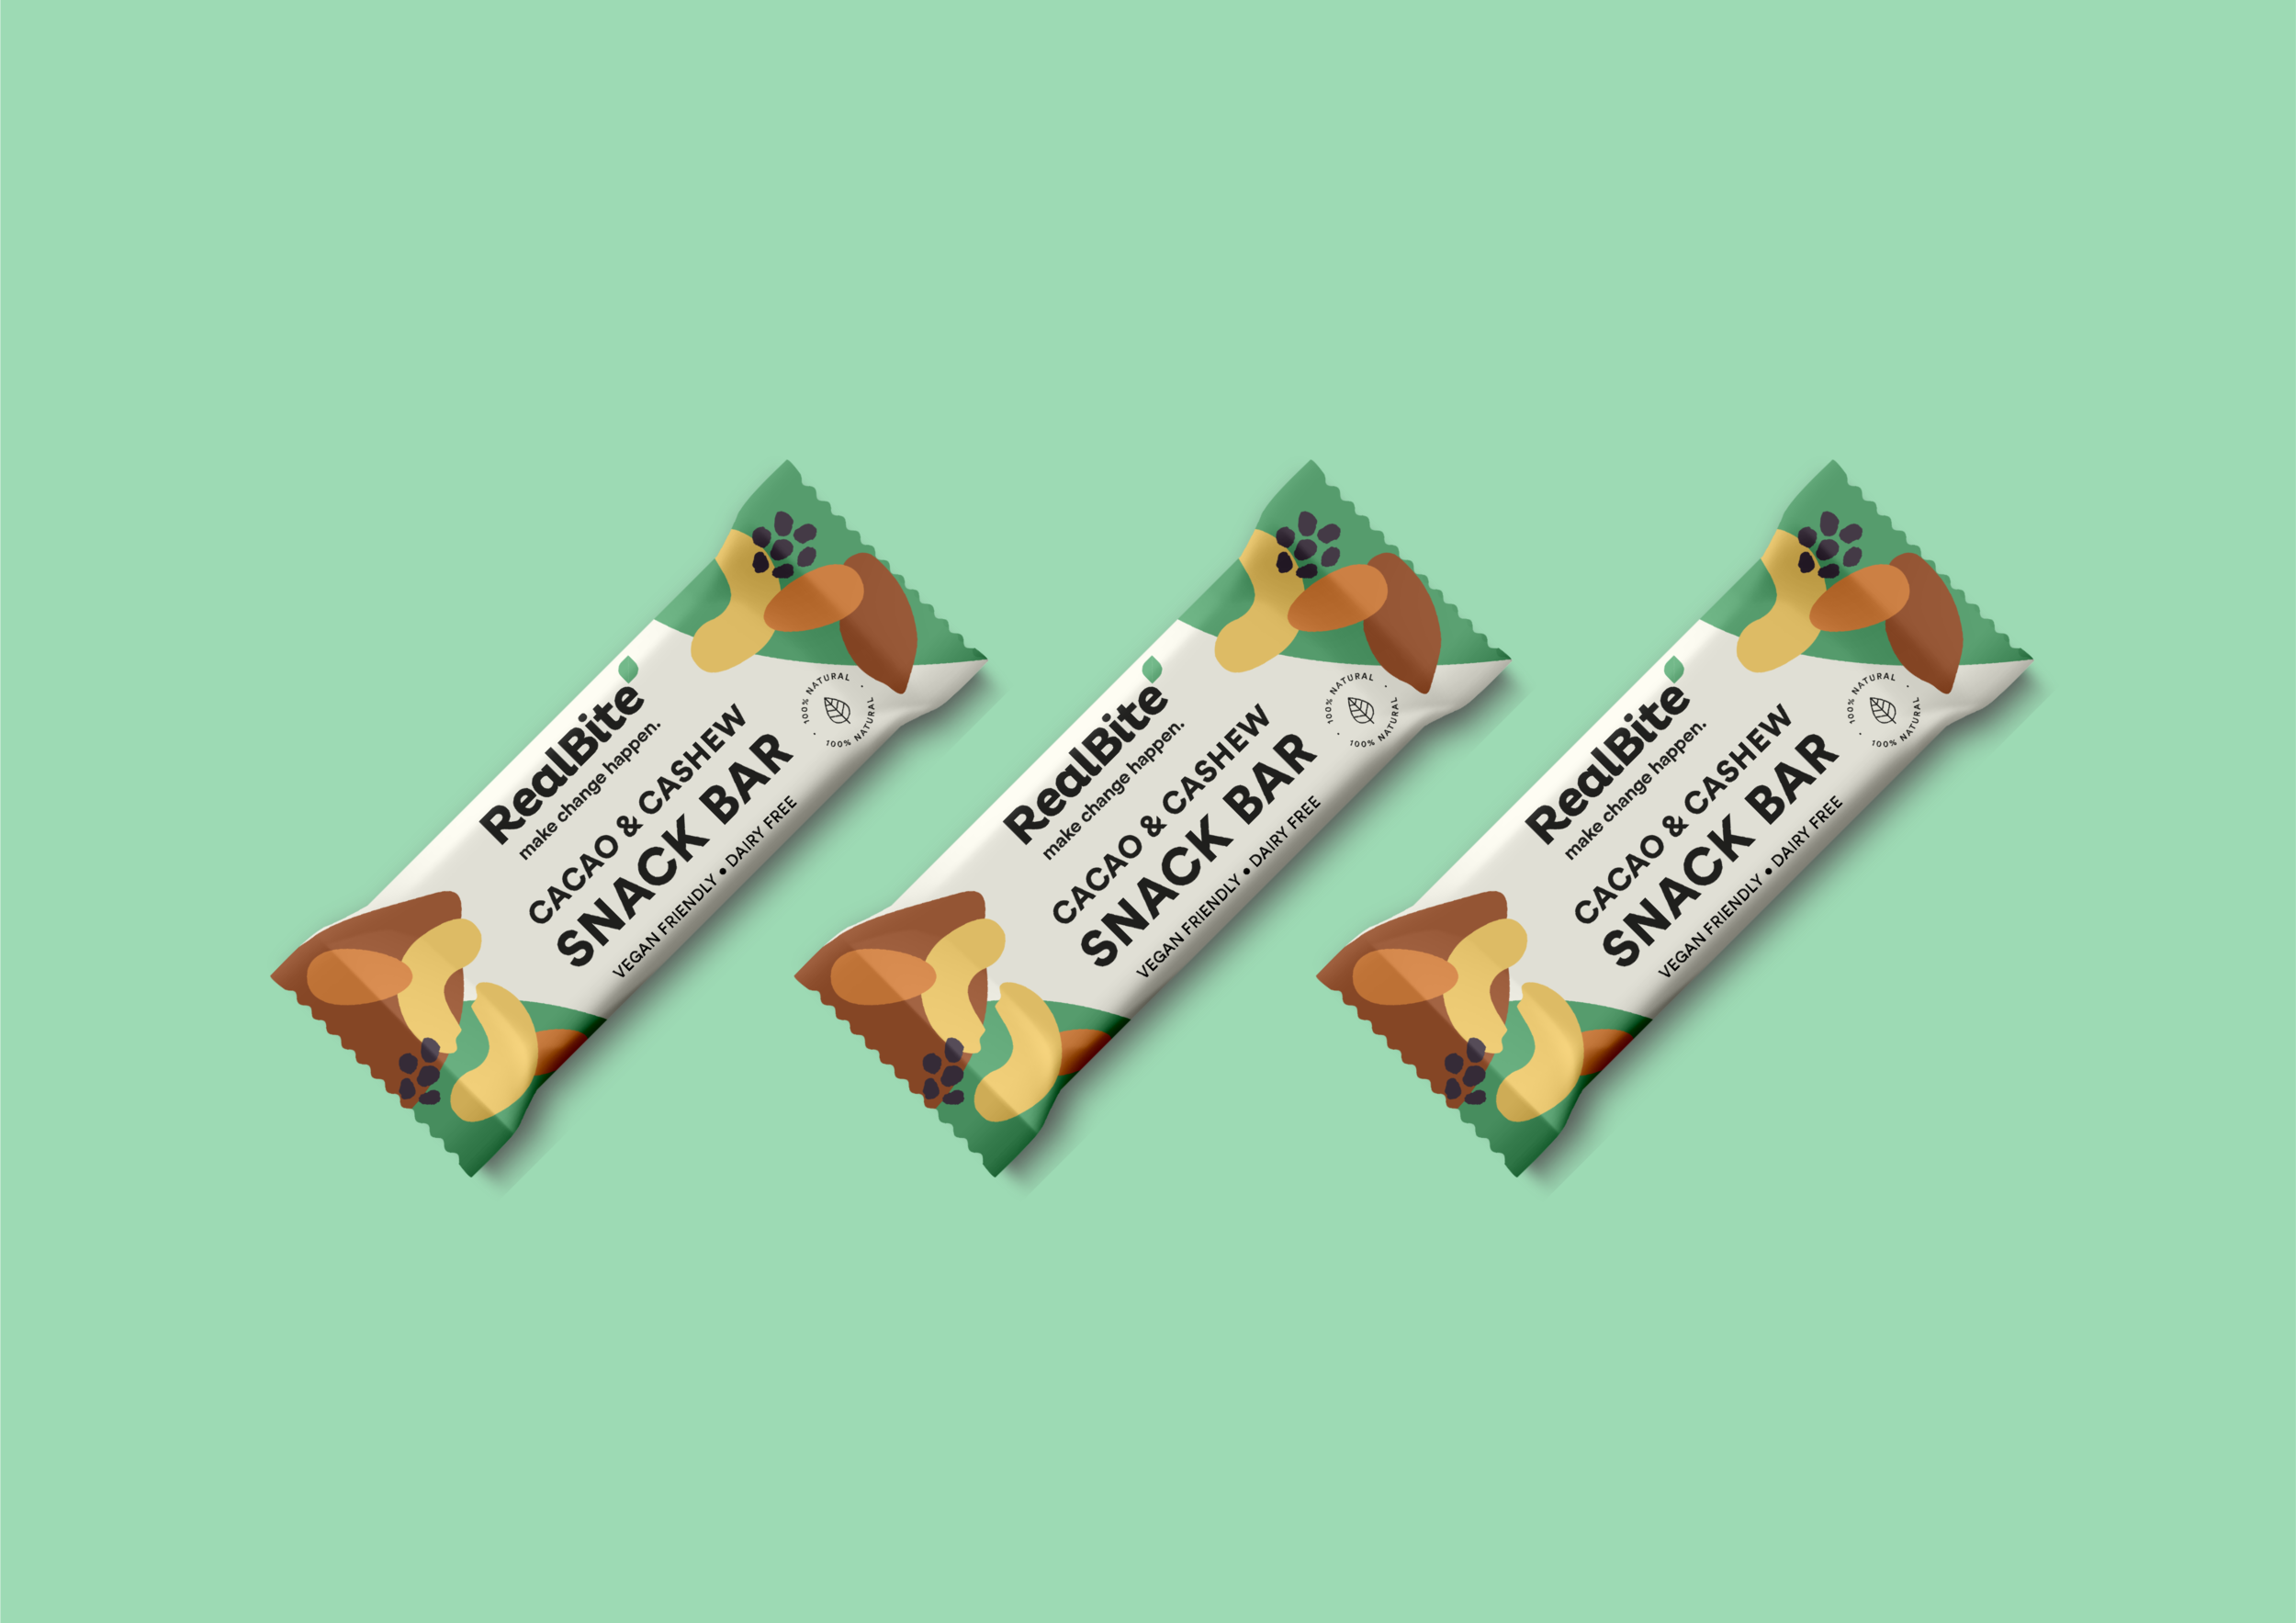 Packaging Designer London - Three RealBite cacao &amp; cashew snack bars in tea green background